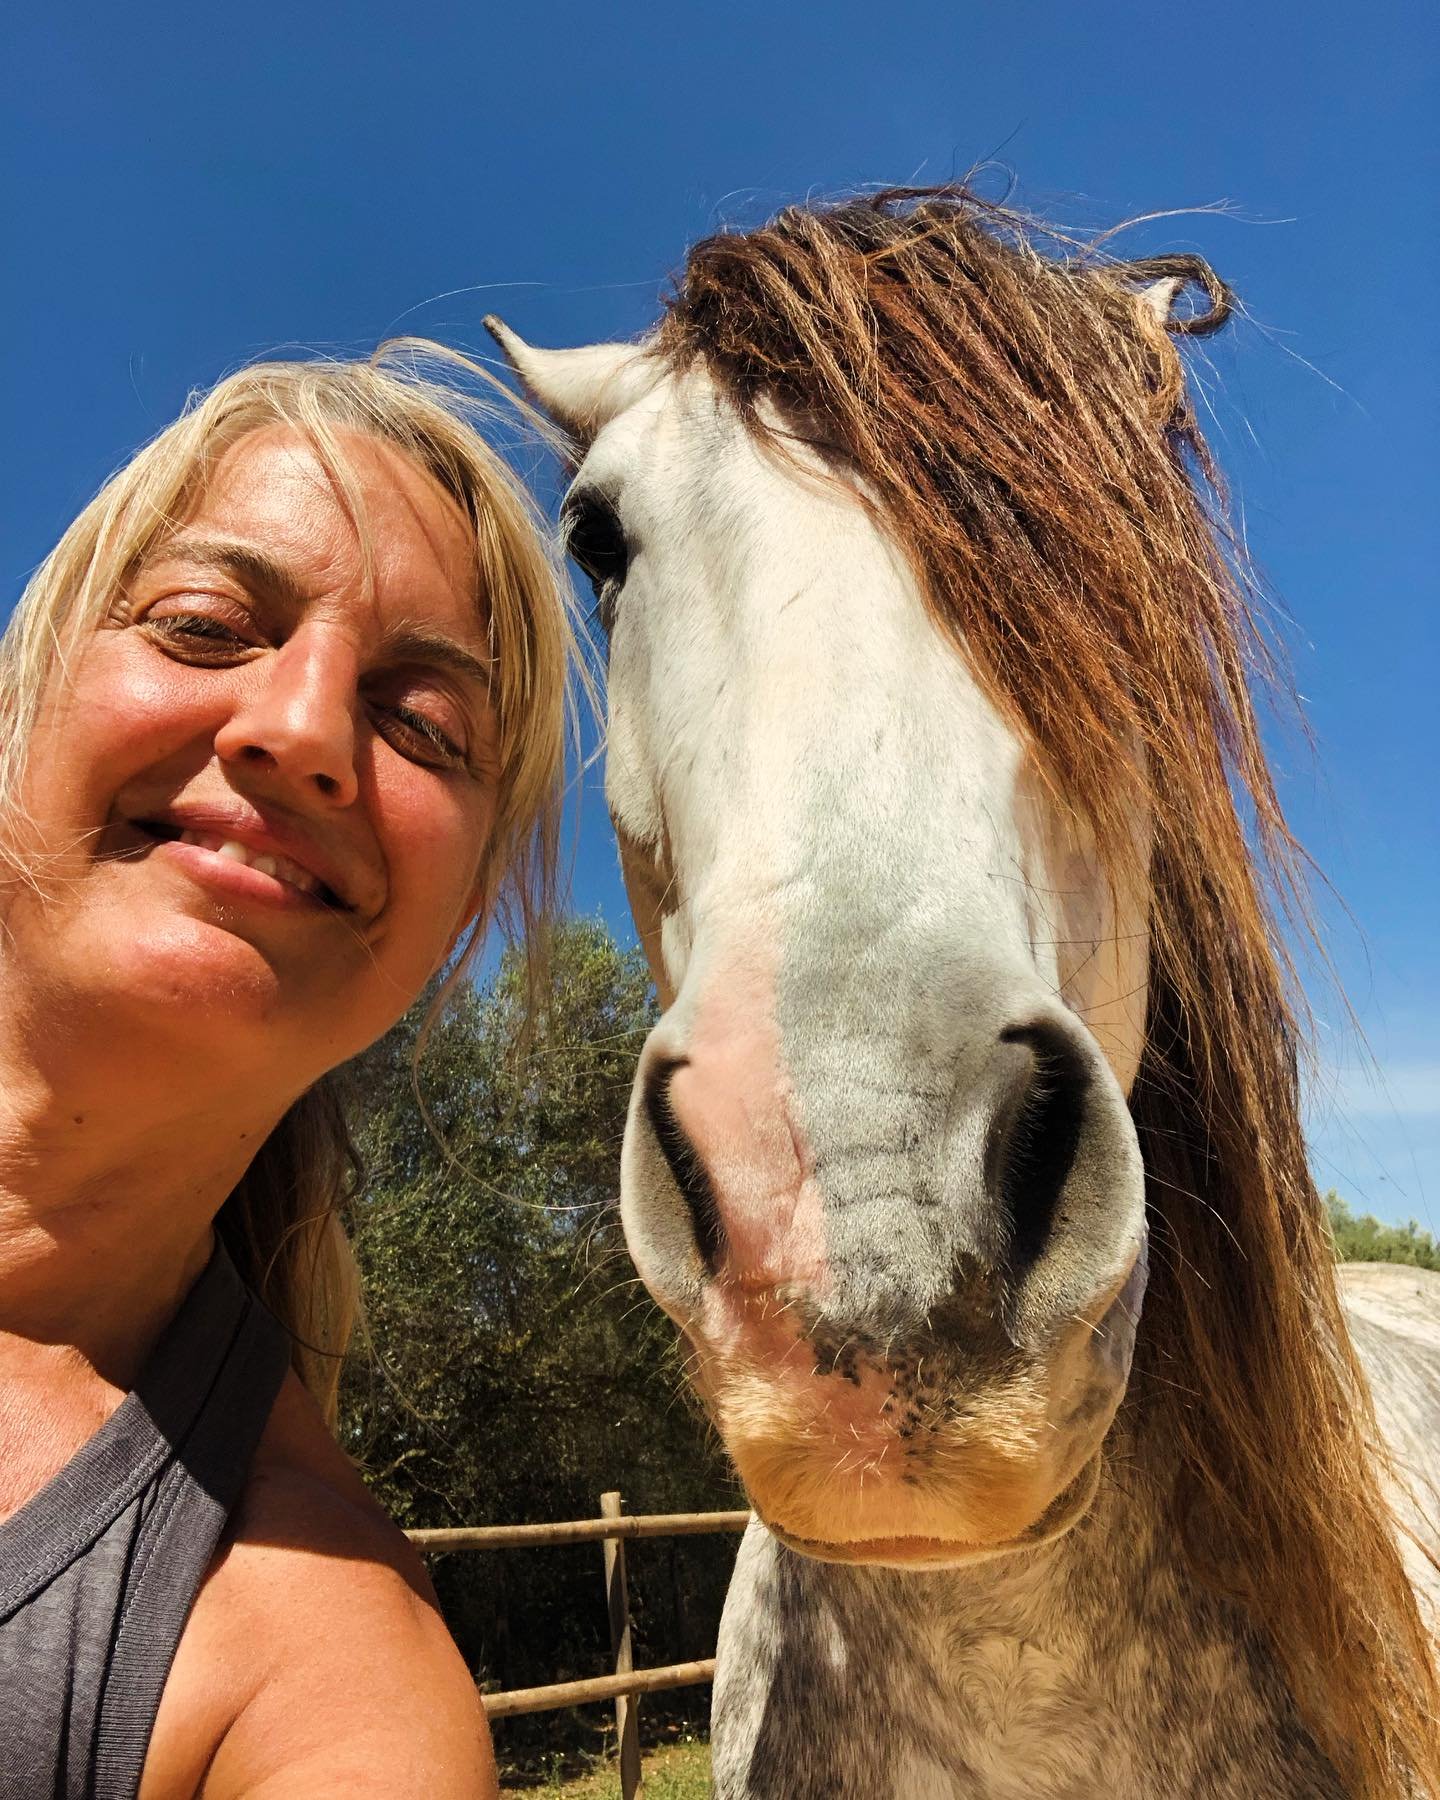 Yesterday, I was given a taster session in how to speak horse.⁣
⁣
It started, as all sessions at @son_cavalls do, by feeling for a real connection.⁣
⁣
Among all the gorgeous horses I met, this handsome young man stood out by far. His name is Viggo, n